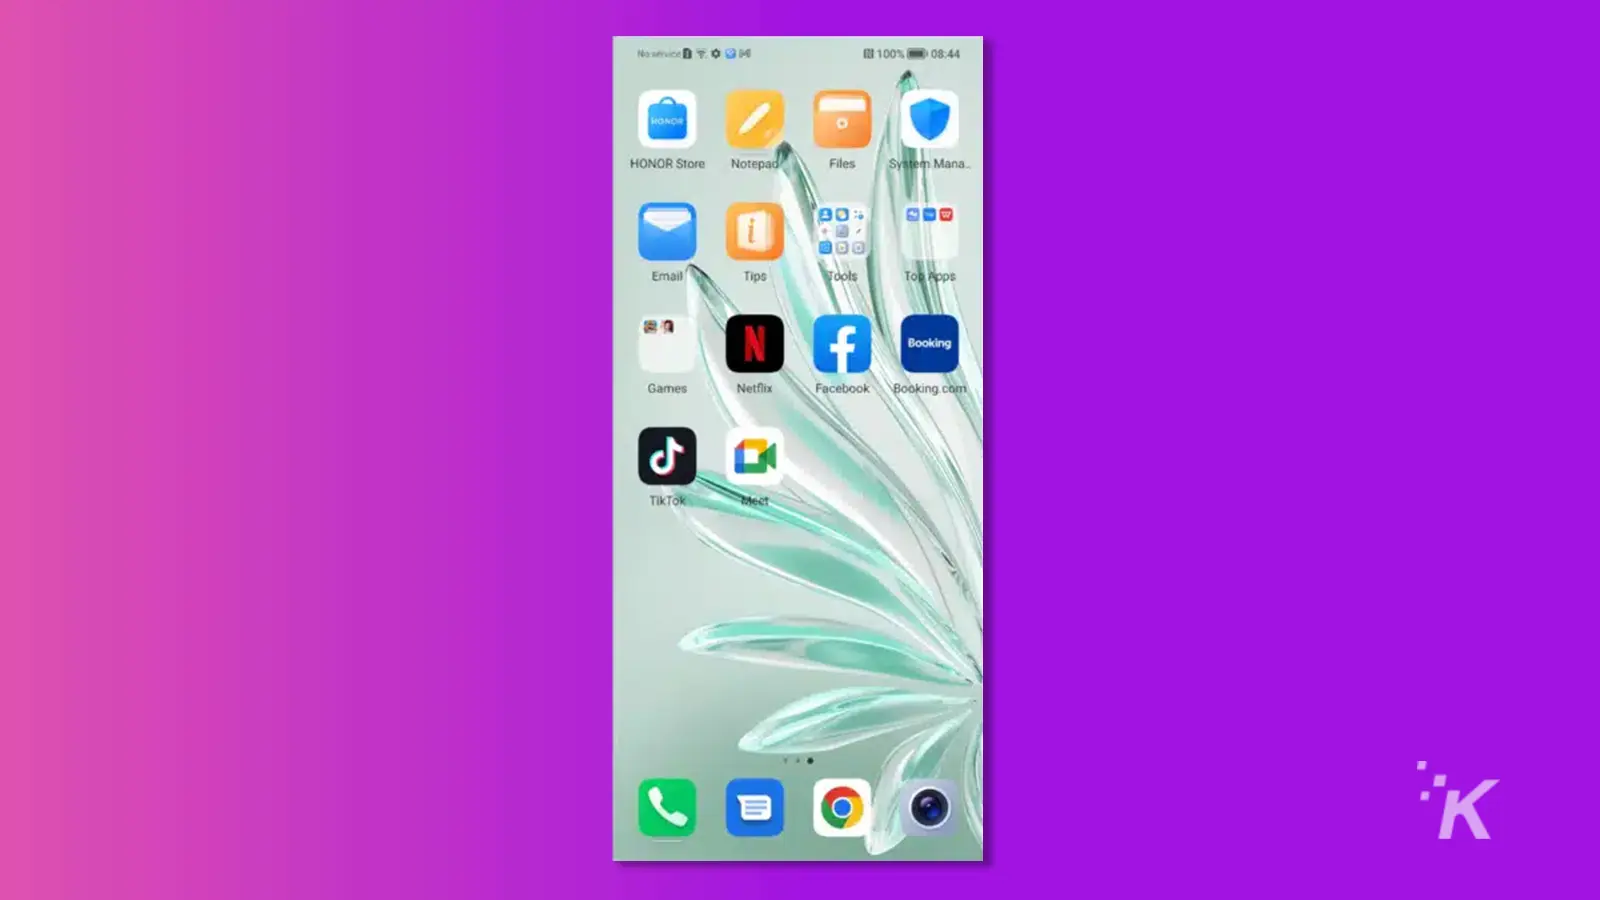 Screen displaying apps